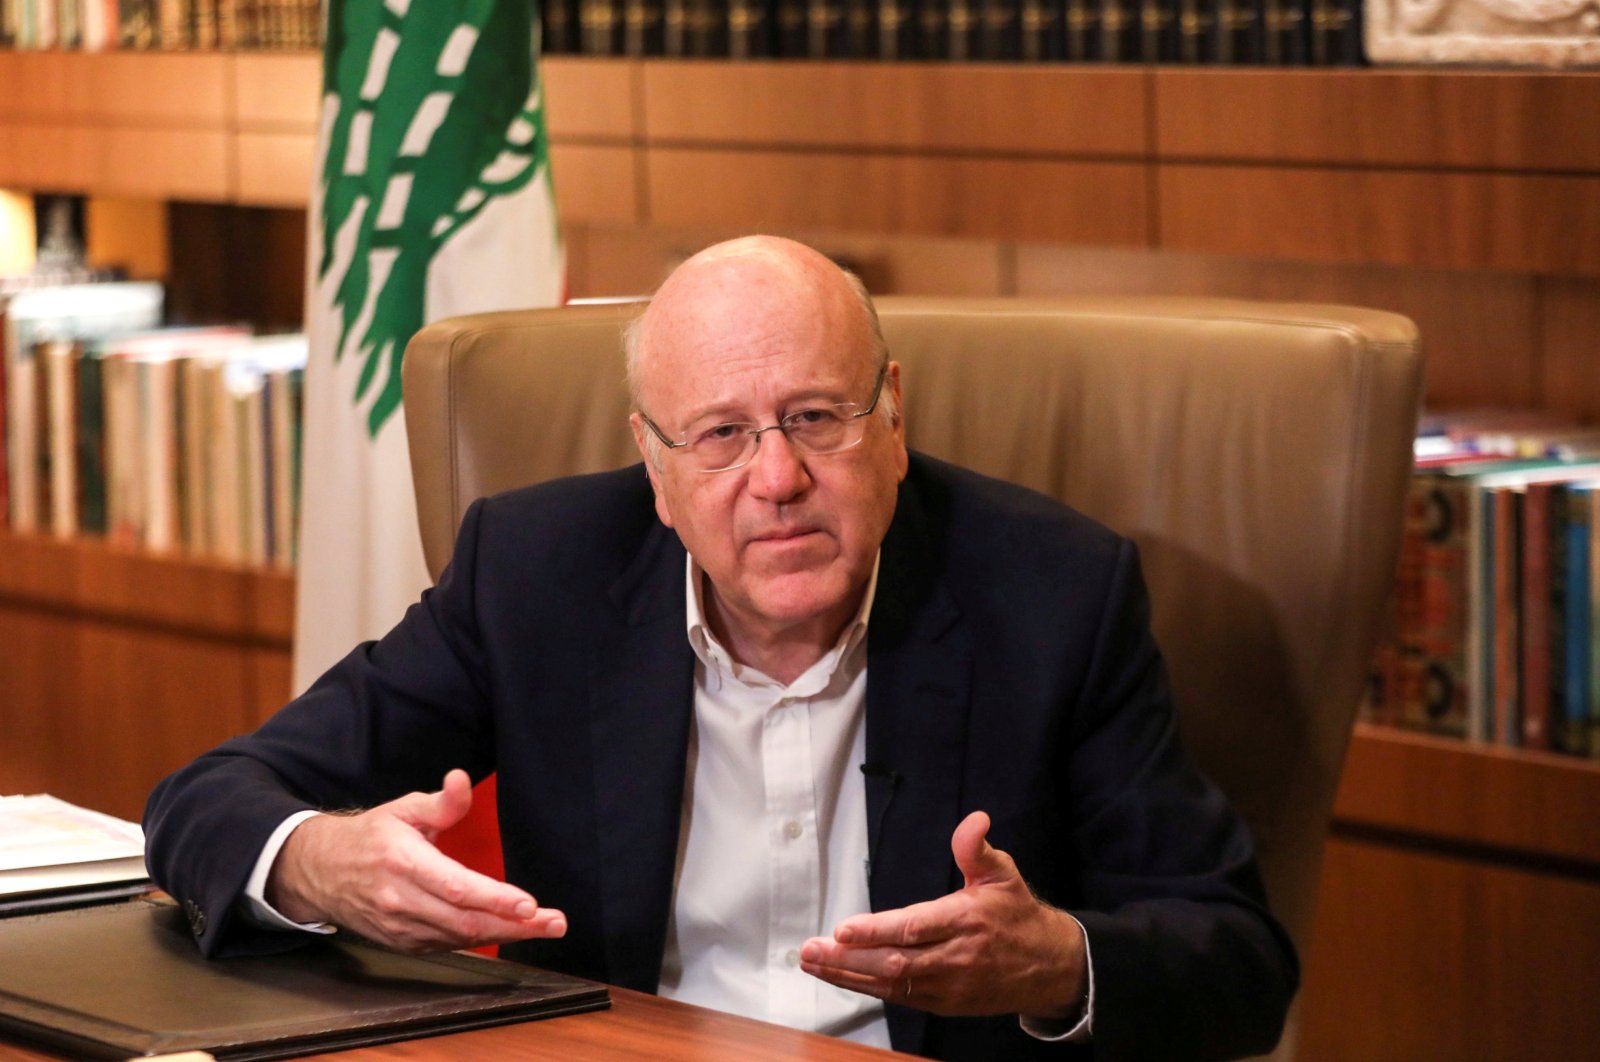 Lebanese Prime Minister Najib Mikati speaks during an interview at the government palace in Beirut, Lebanon, Oct. 14, 2021. (Reuters Photo)